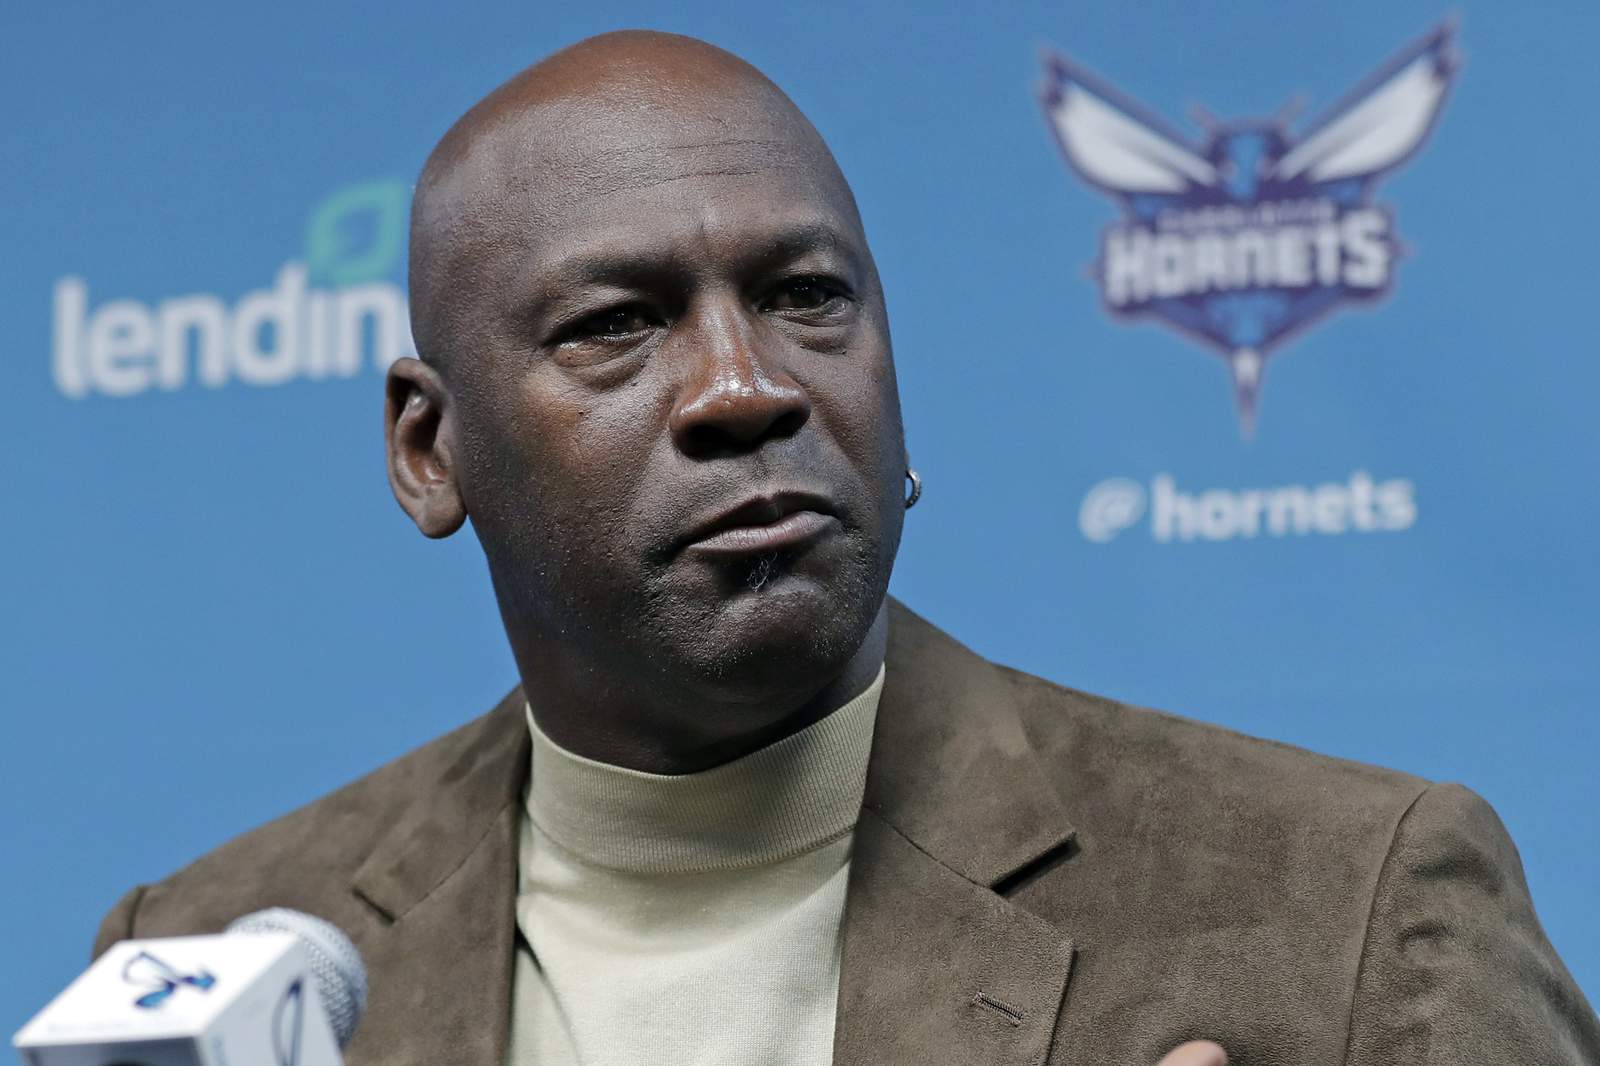 Jordan talks to Hornets about being uncomfortable, winning